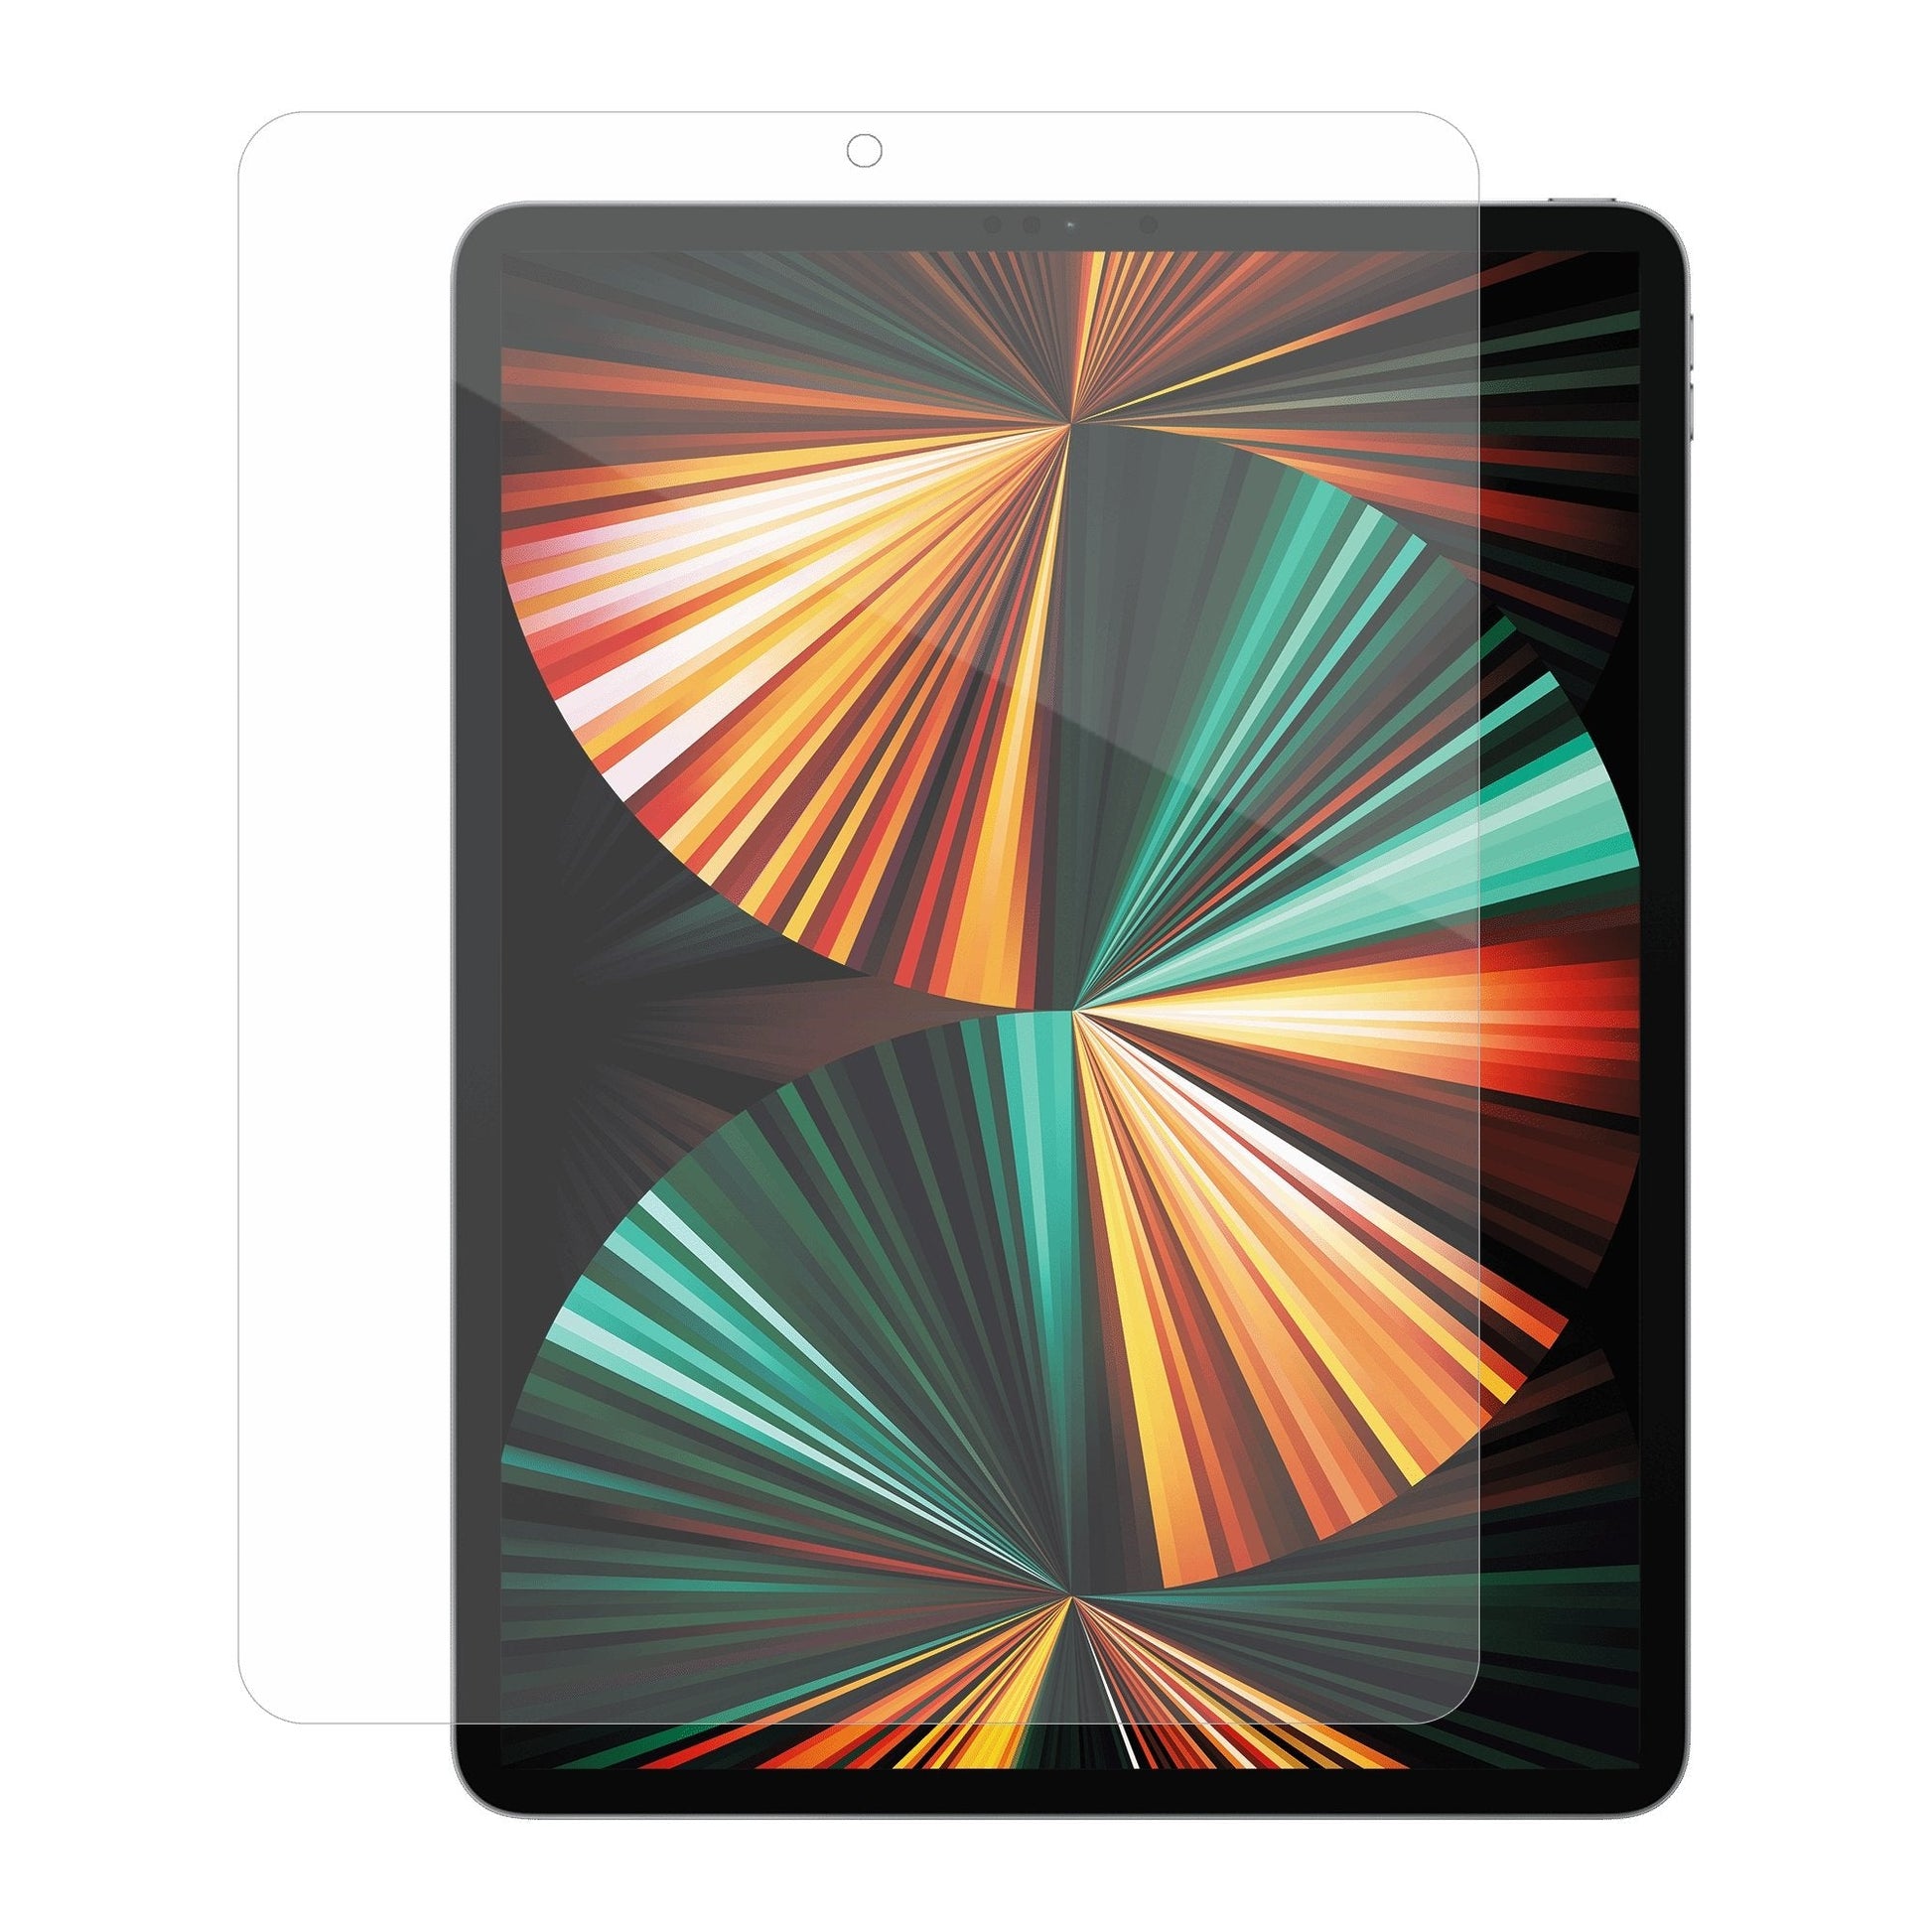 Tempered Glass Screen Protection for iPad Pro 11